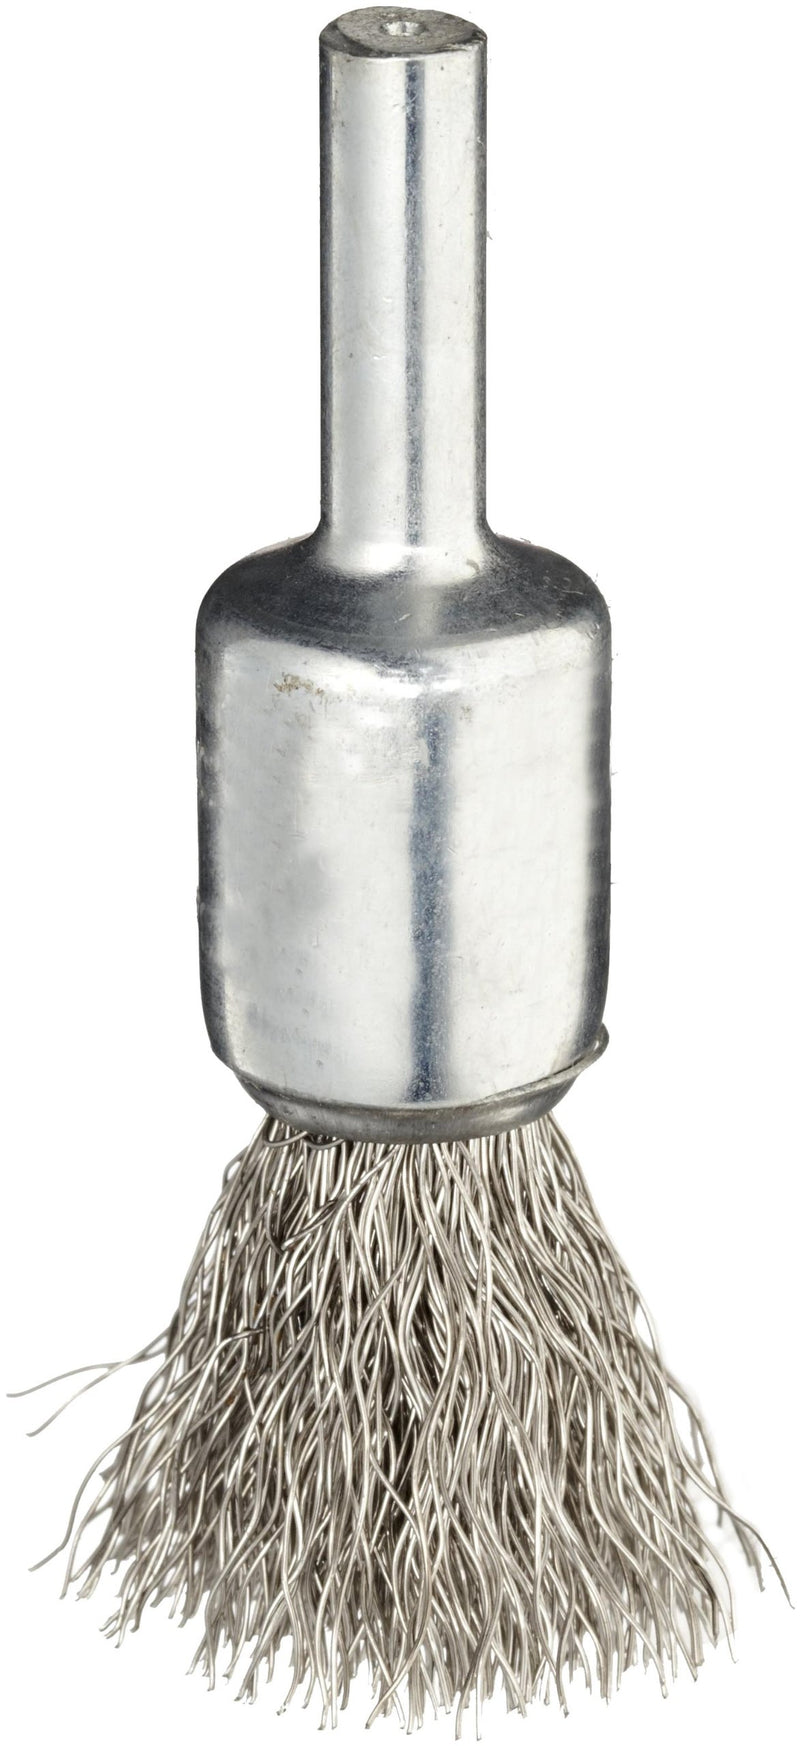 Weiler 10014 1/2" Crimped Wire End Brush, .0104" Stainless Steel Fill, Made in the USA 0.0104" Wire Fill - NewNest Australia